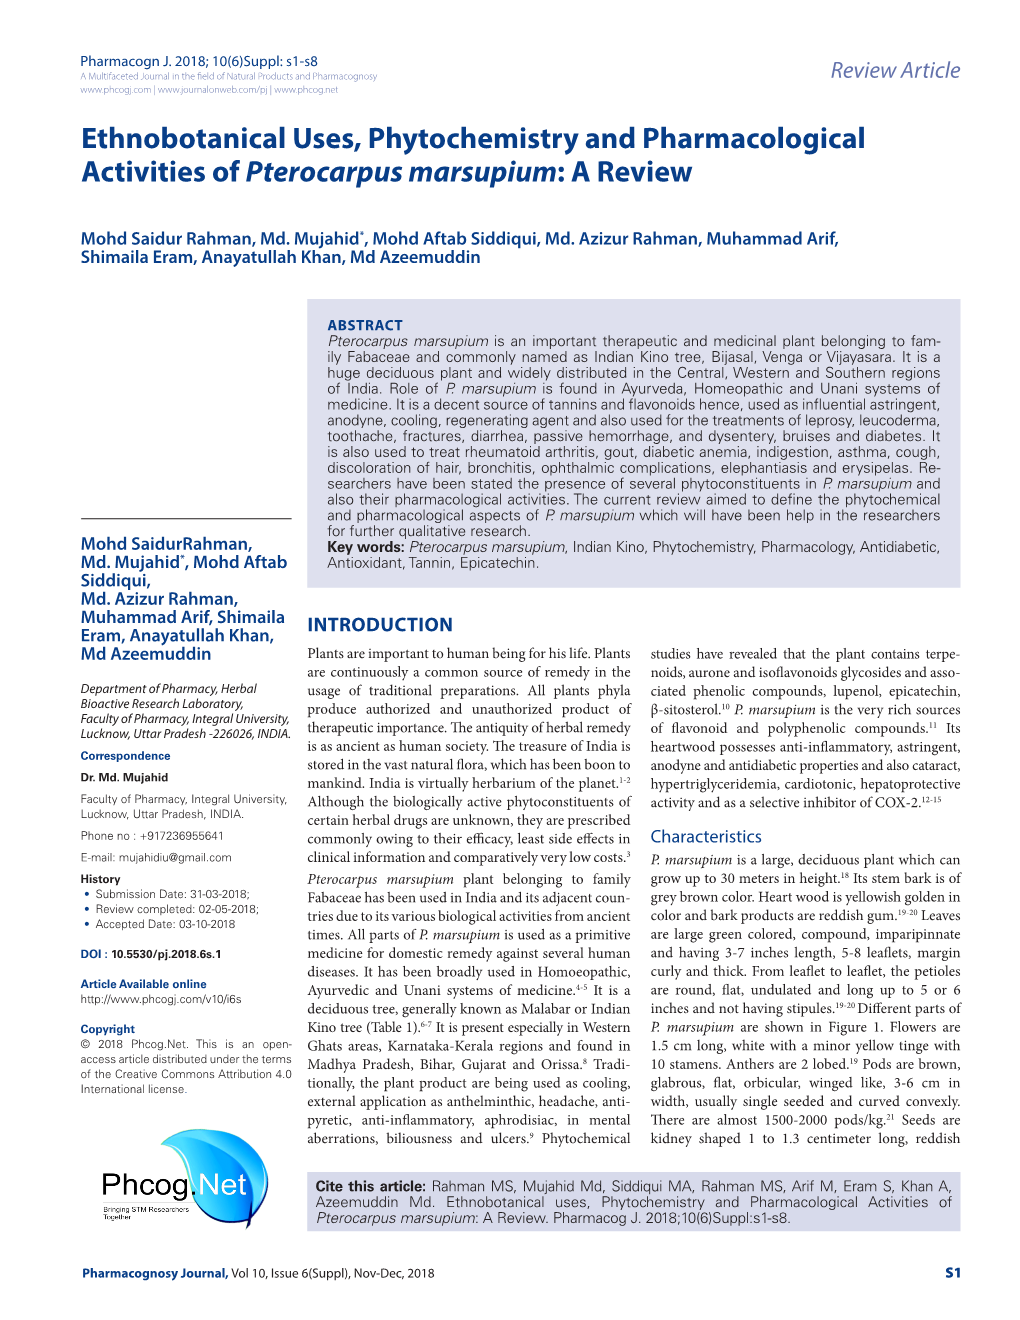 Ethnobotanical Uses, Phytochemistry and Pharmacological Activities of Pterocarpus Marsupium: a Review